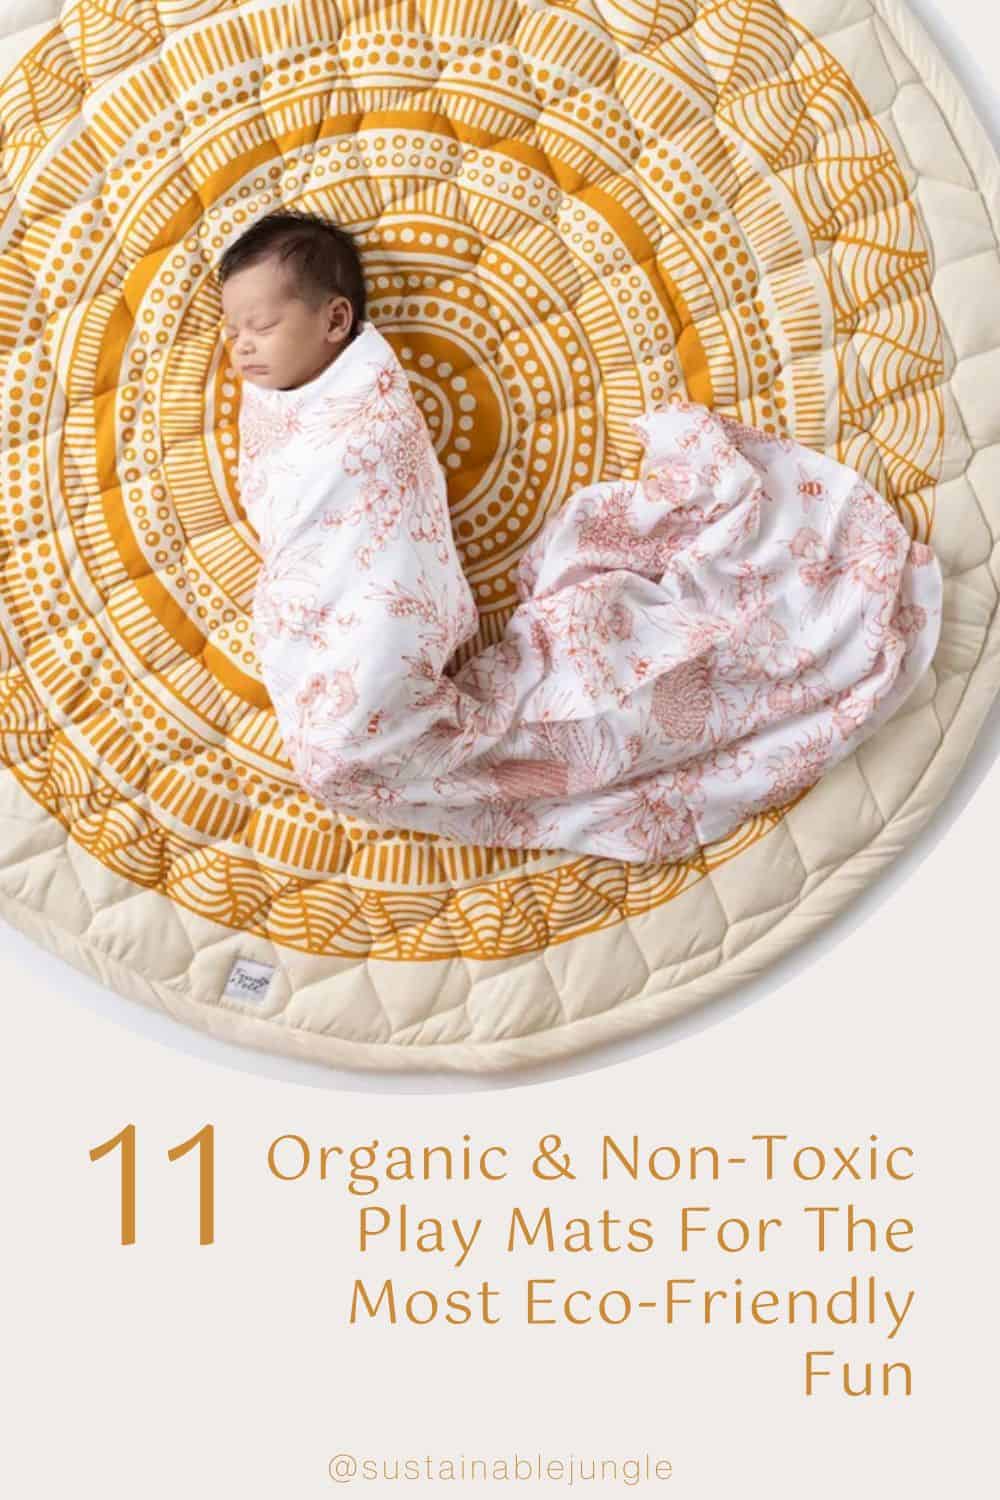 11 Organic & Non-Toxic Play Mats For The Most Eco-Friendly Fun Image by Finch & Folk #organicplaymats #organiccottonplaymats #nontoxicplaymats #organicbabyplaymats #nontoxicbabyplaymats #sustainablejungle